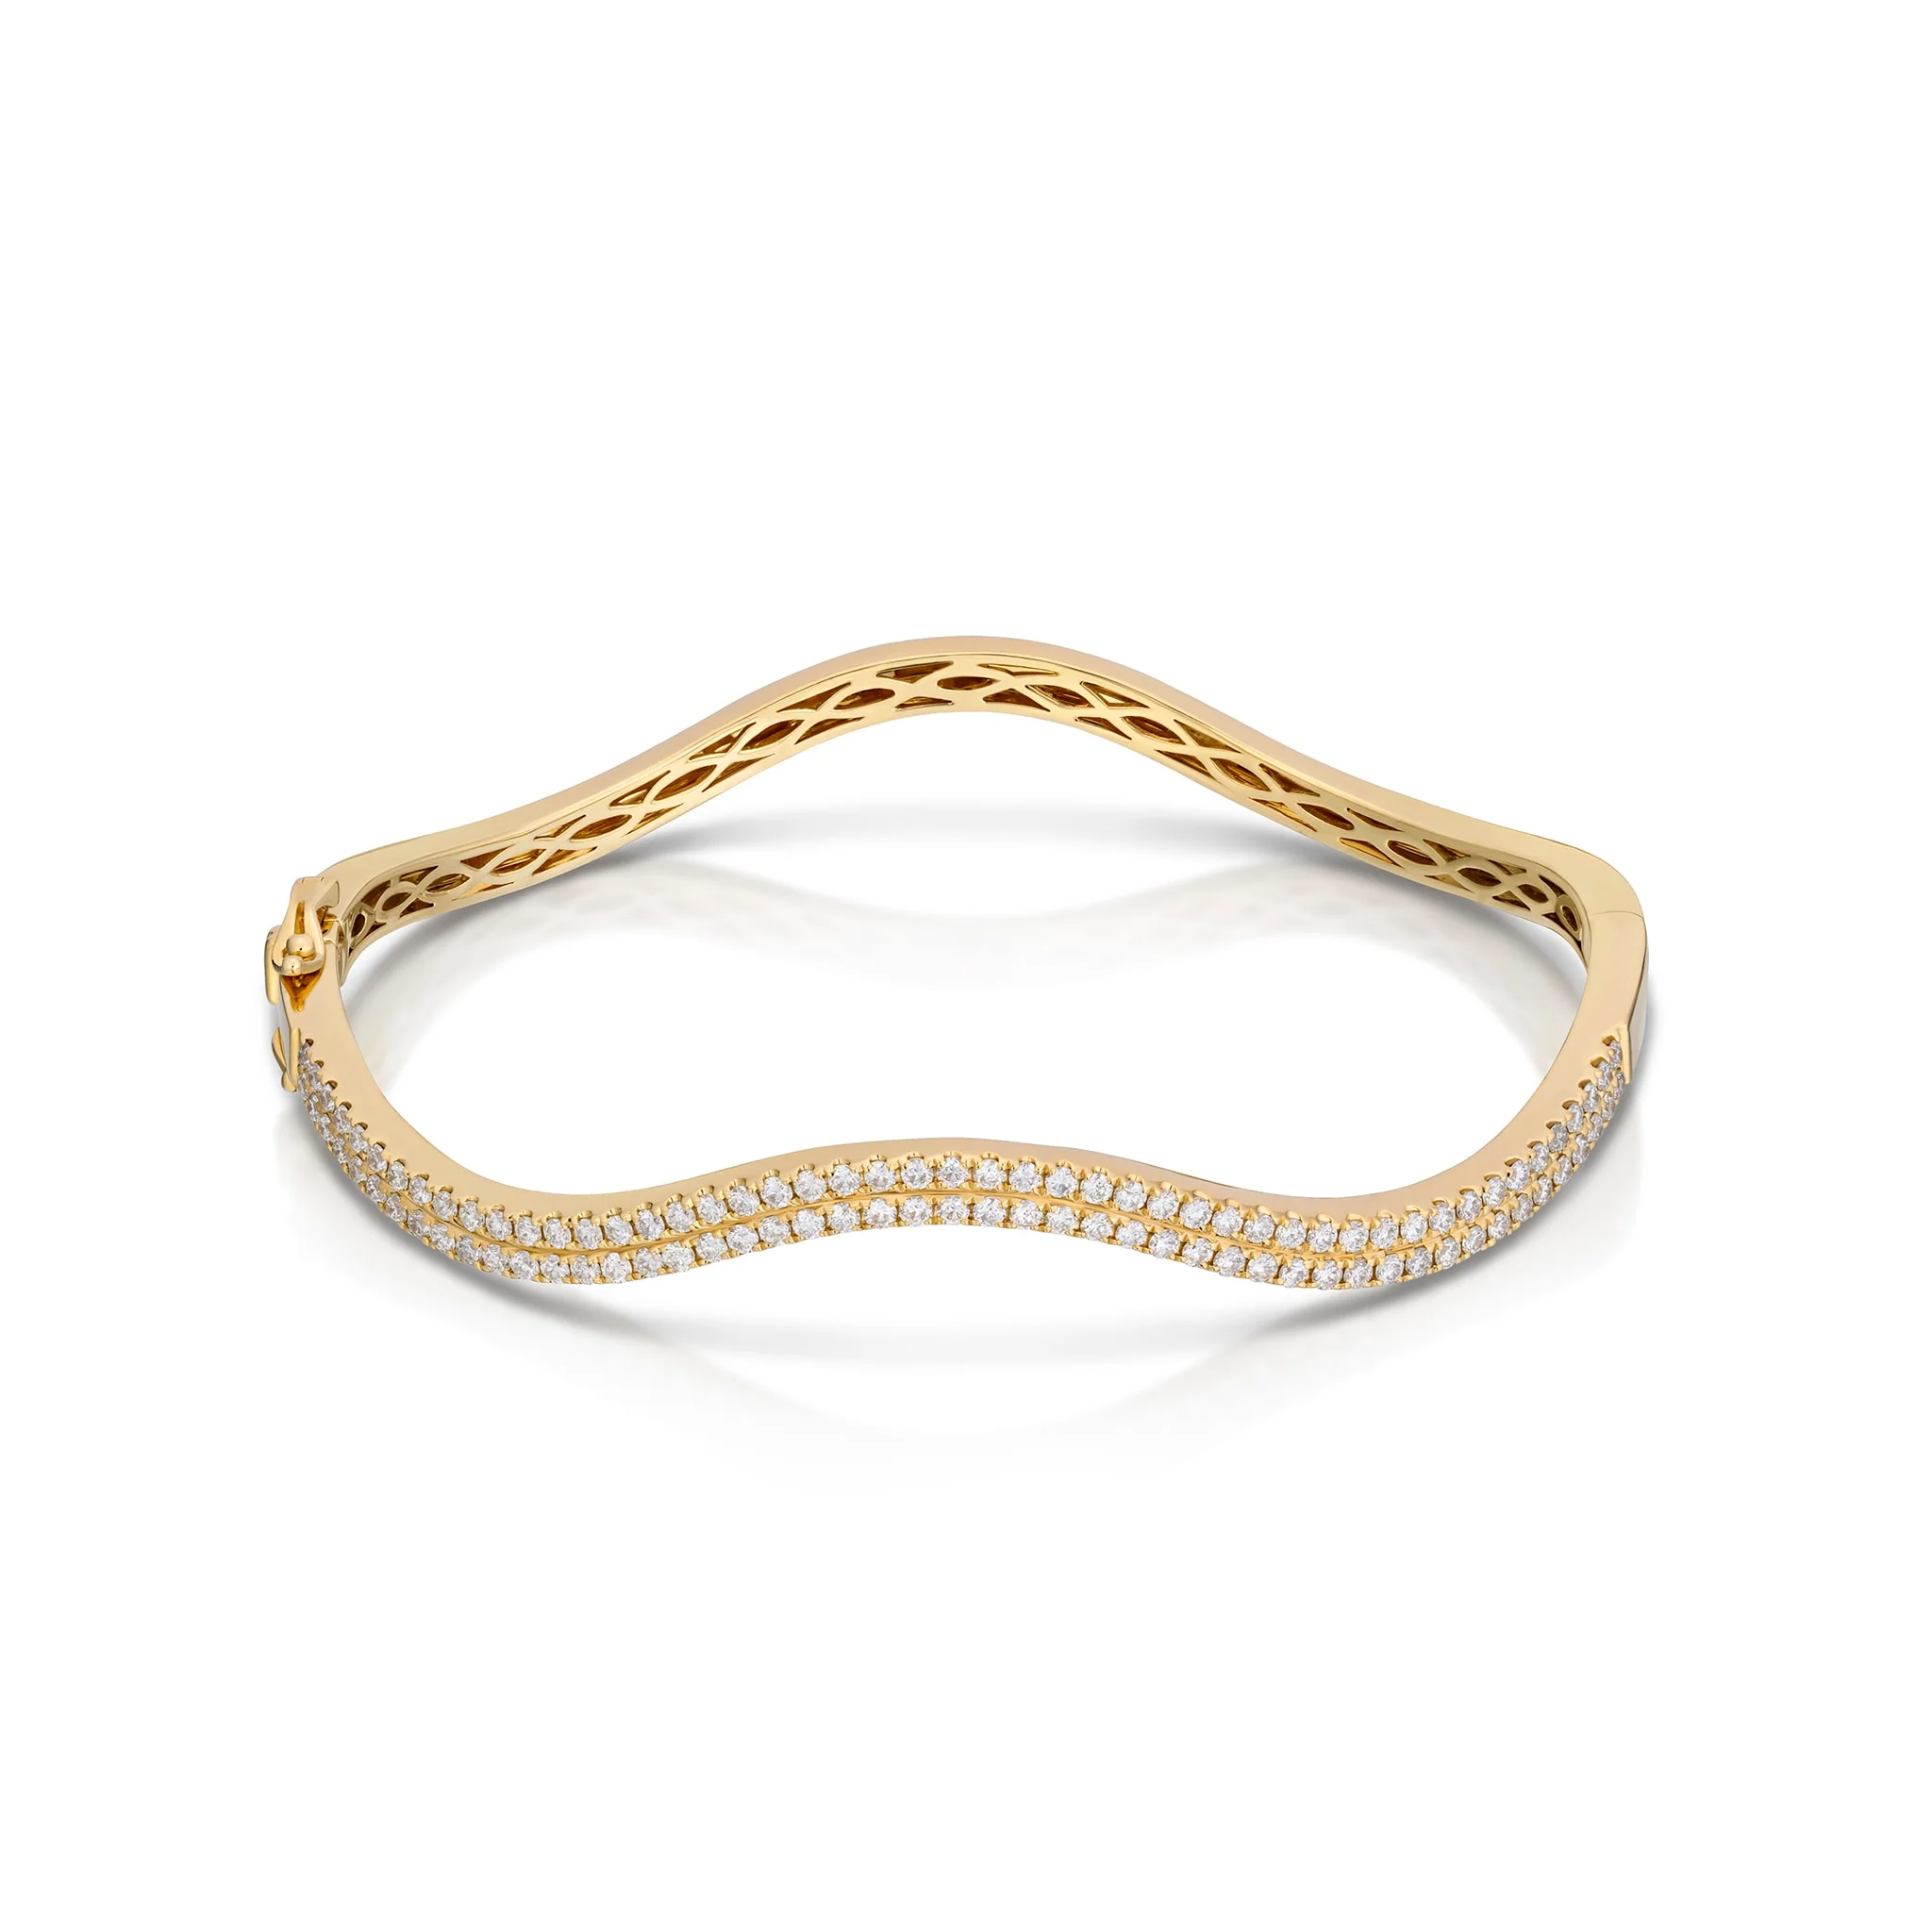 Timeless Beauty: 22 Carat Gold Bangles for Classic Appeal